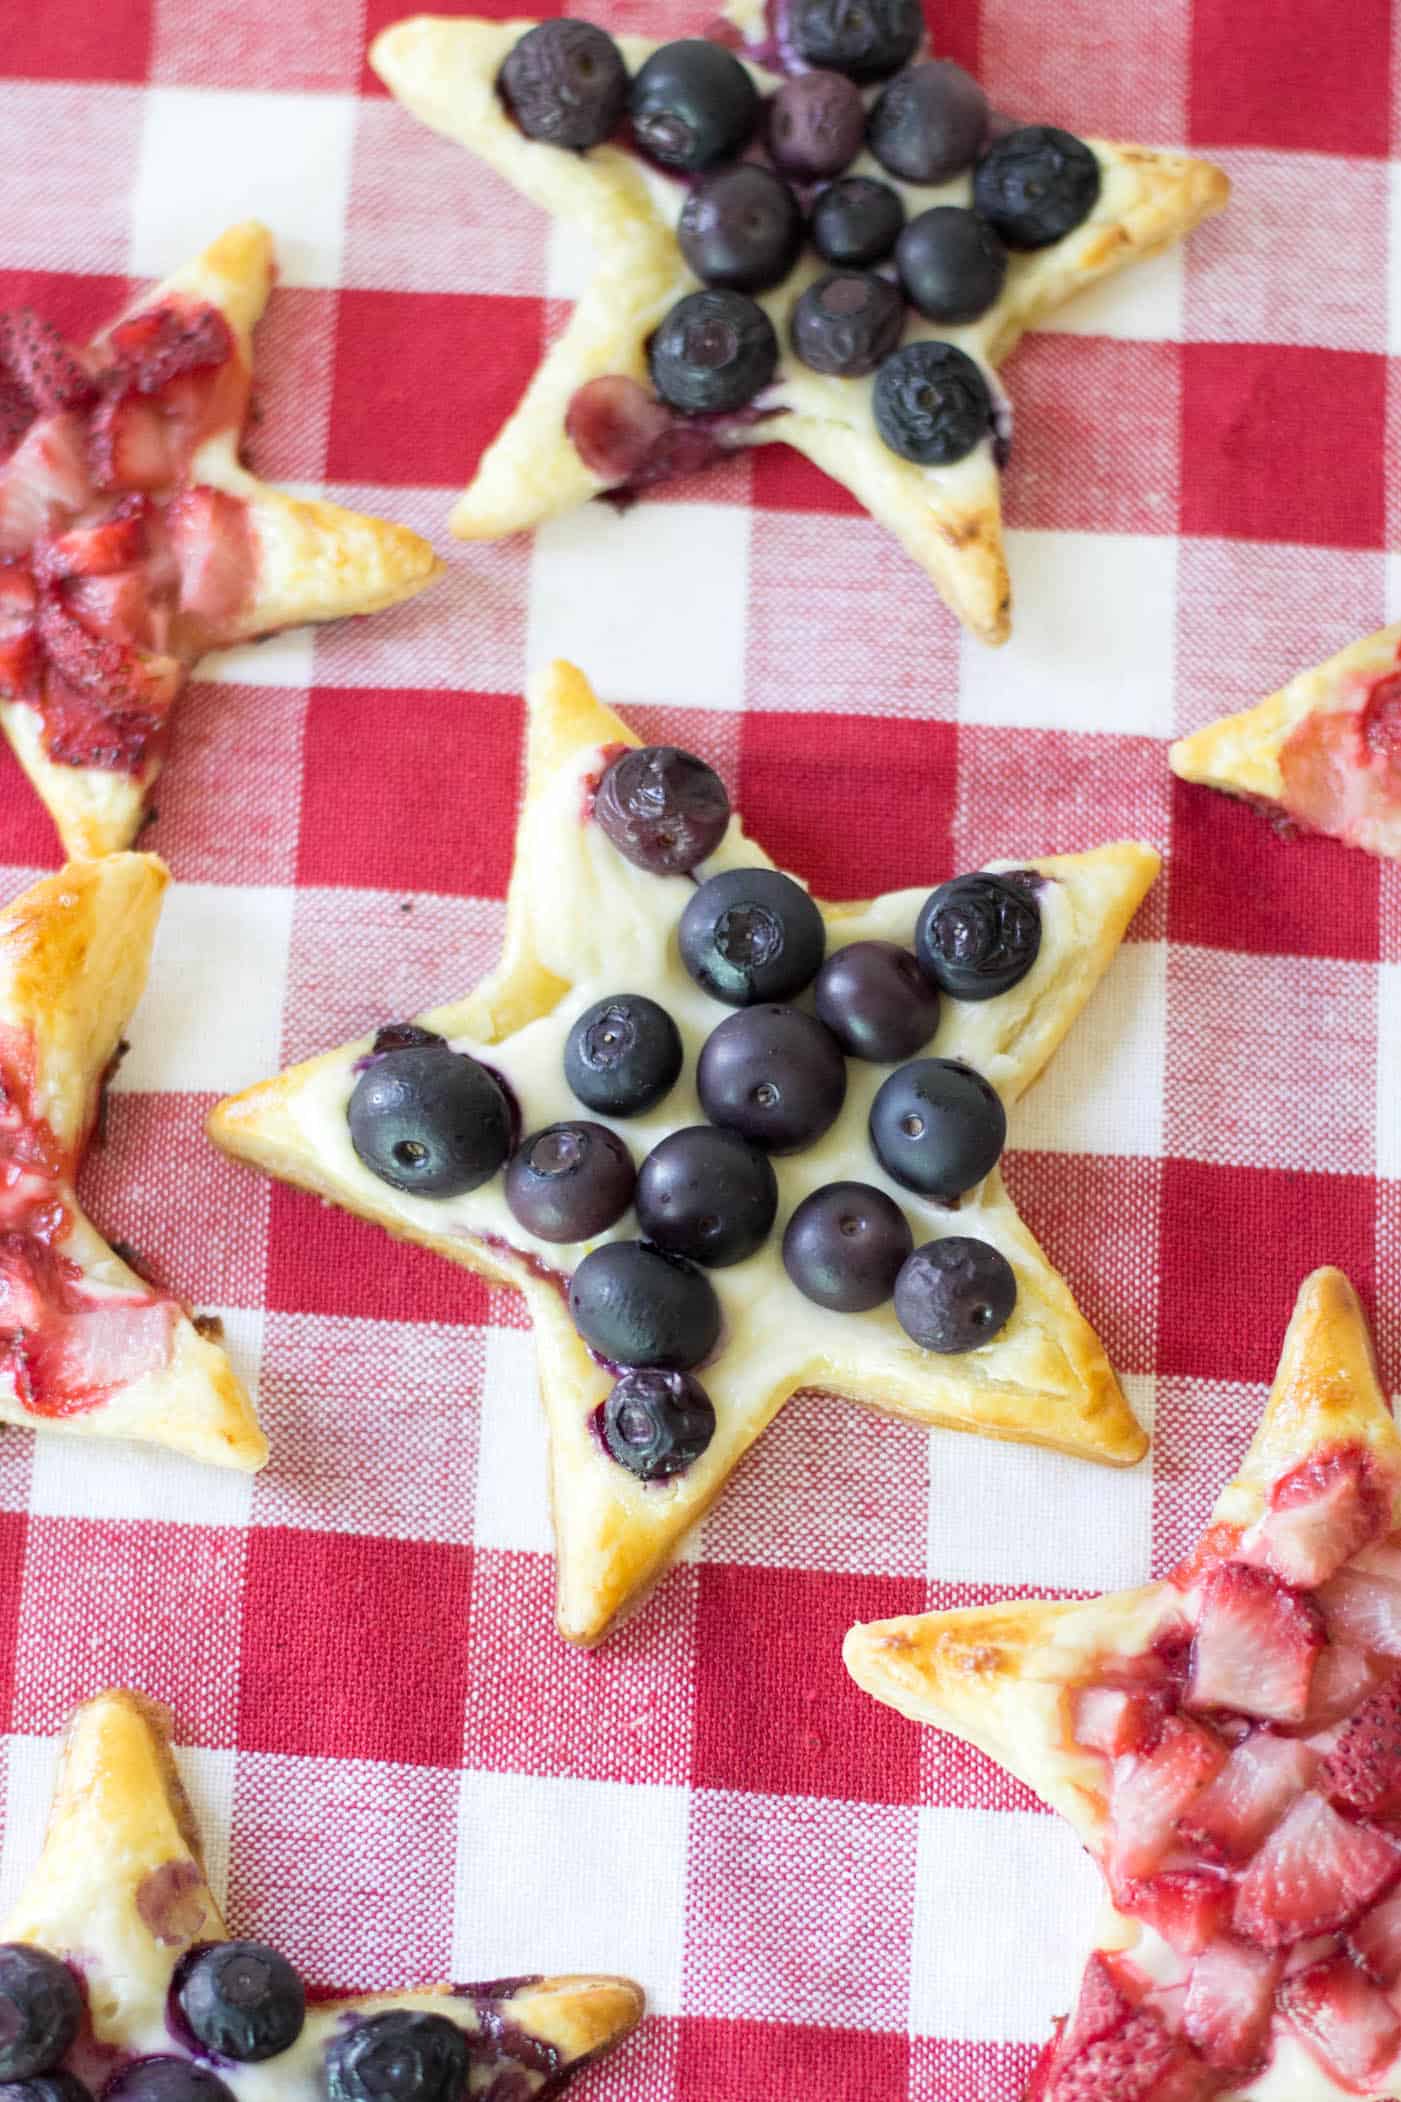 This delicious puff pastry recipe is perfect for summer! You'll use mixed berries along with cream cheese to make this tasty, star-shaped dessert.